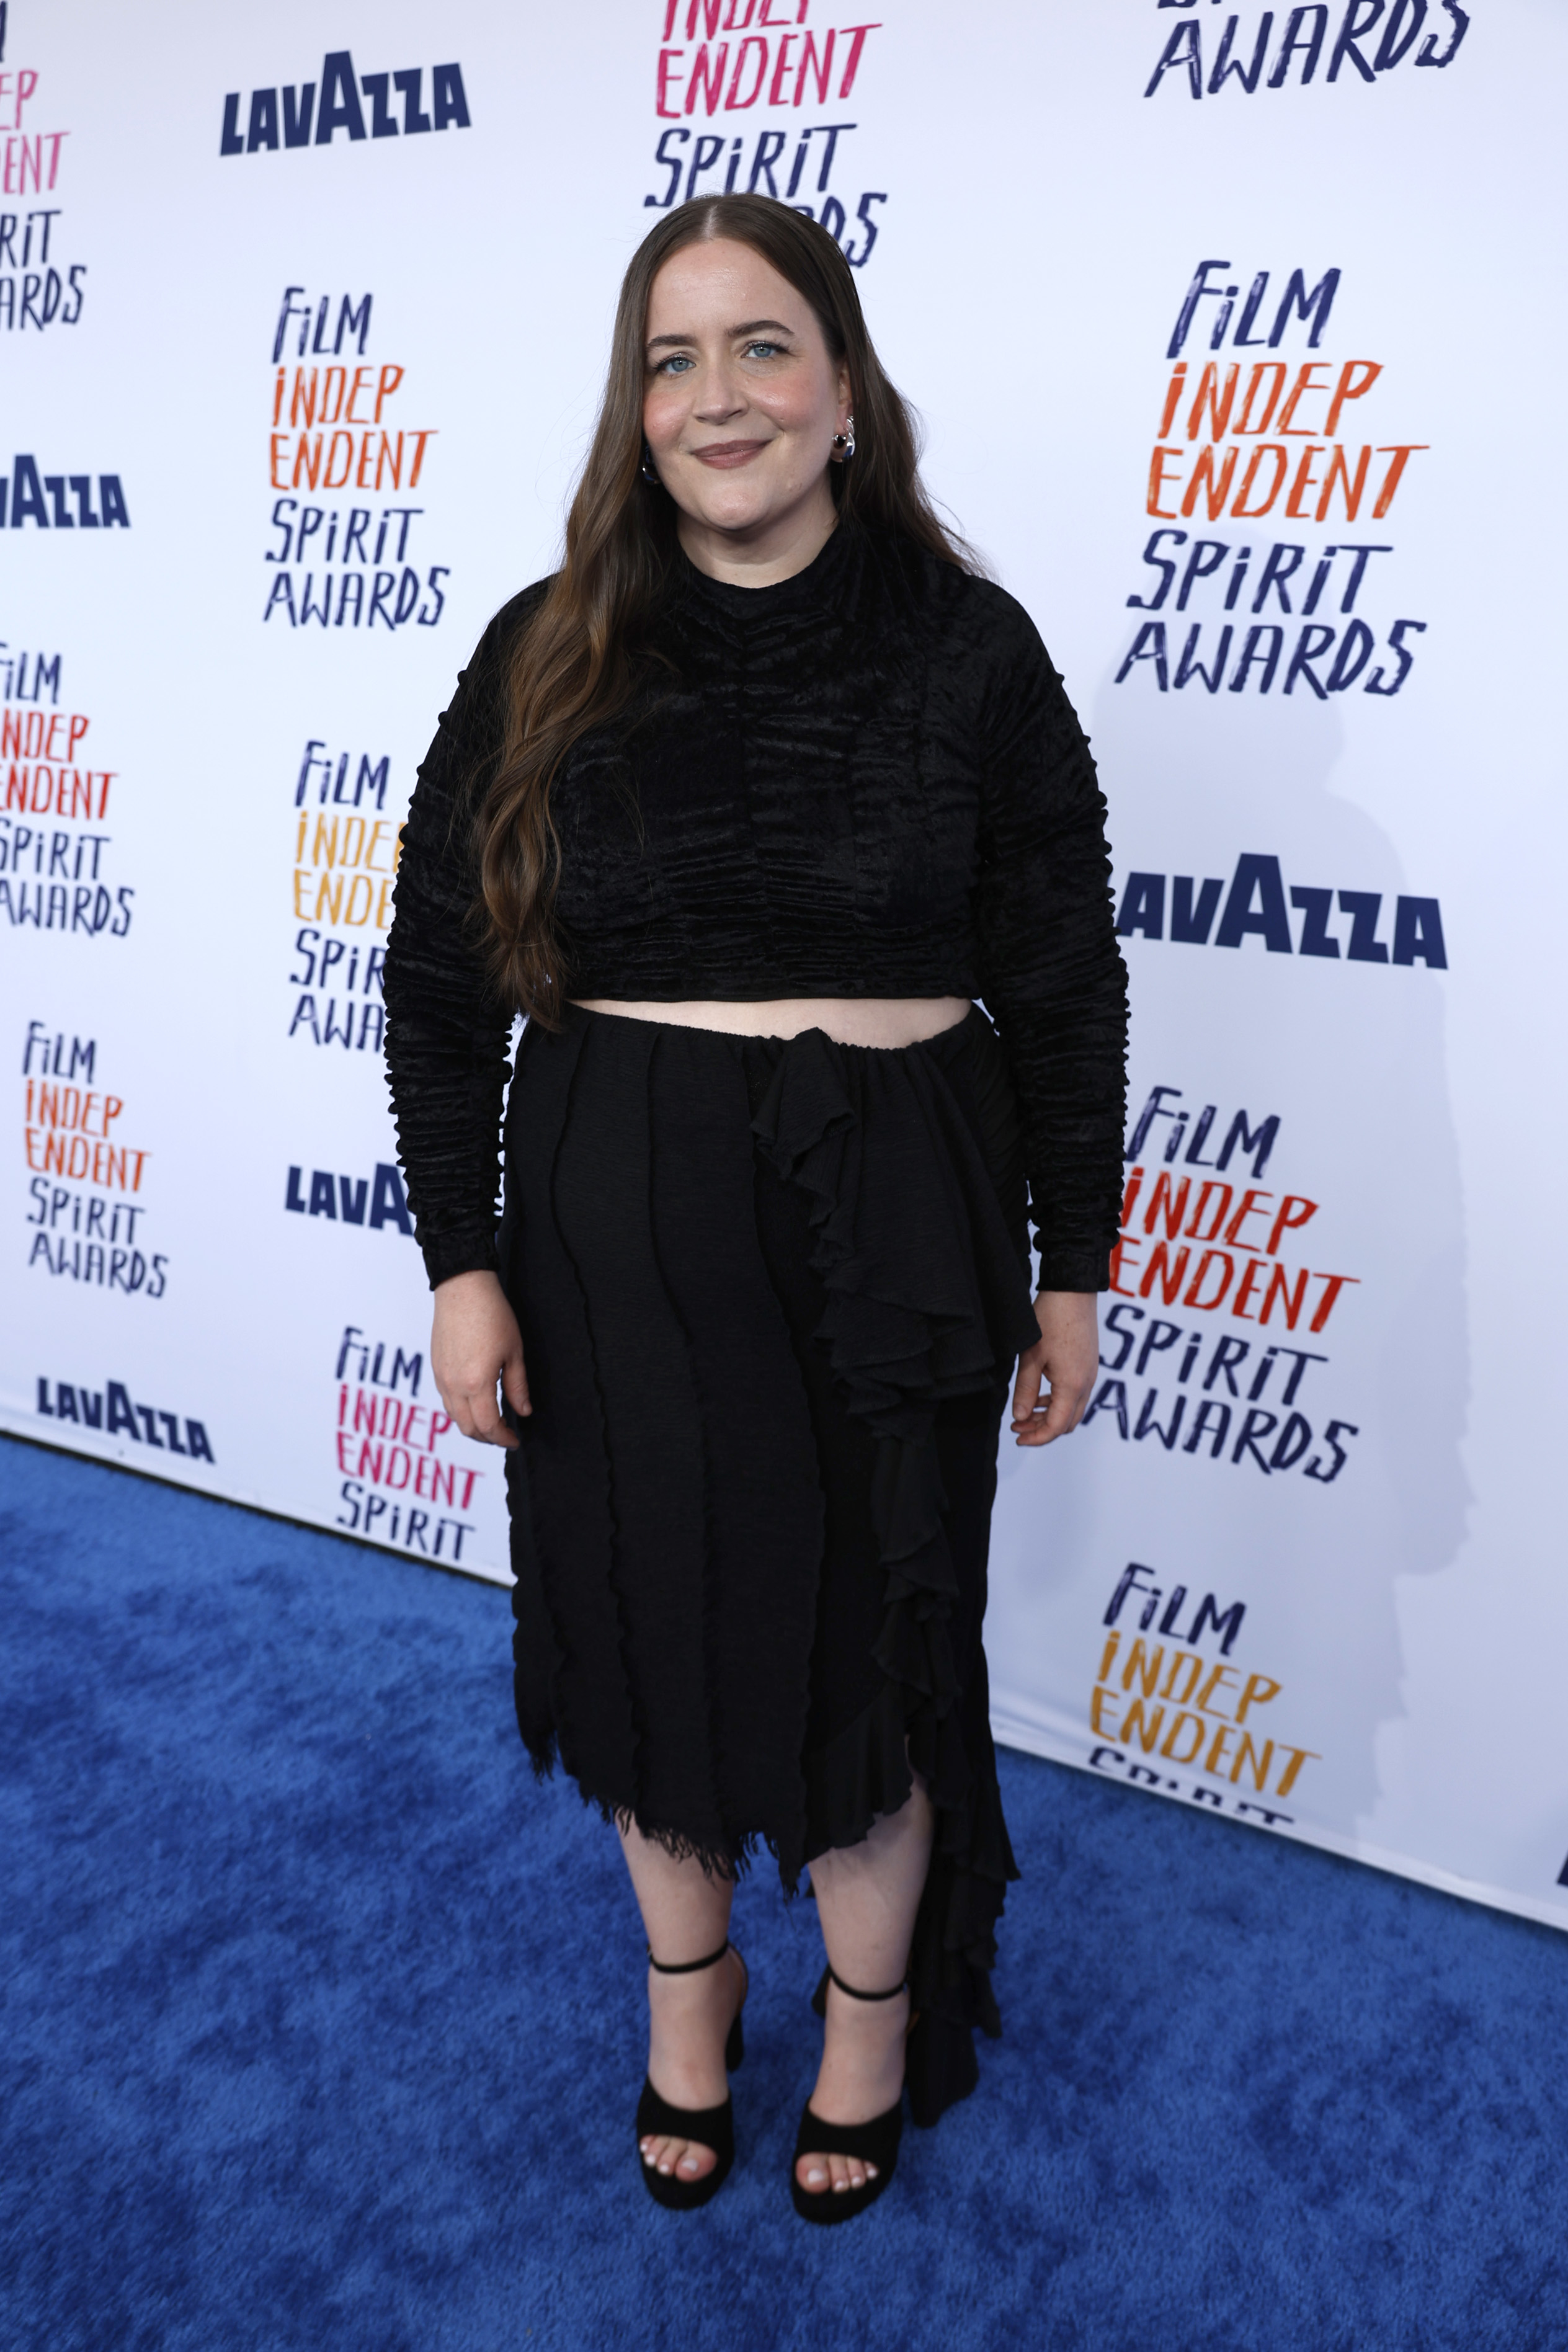 Aidy in a textured crop top and skirt with fringe details, posing at the Independent Spirit Awards